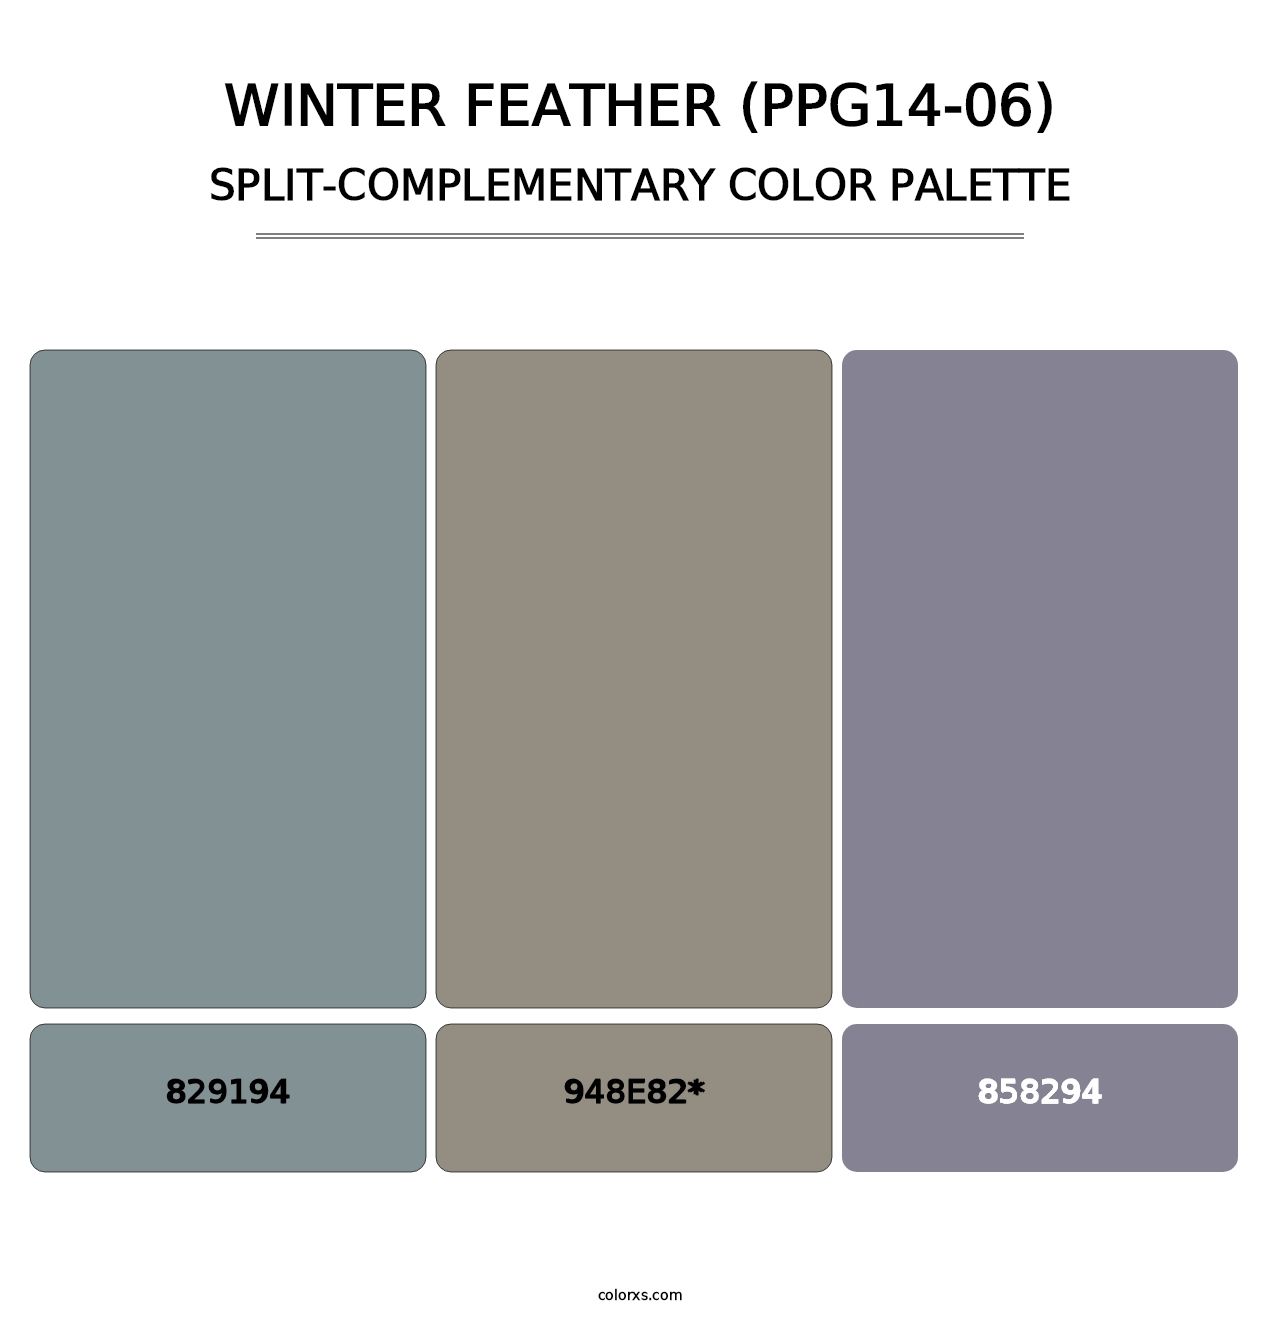 Winter Feather (PPG14-06) - Split-Complementary Color Palette